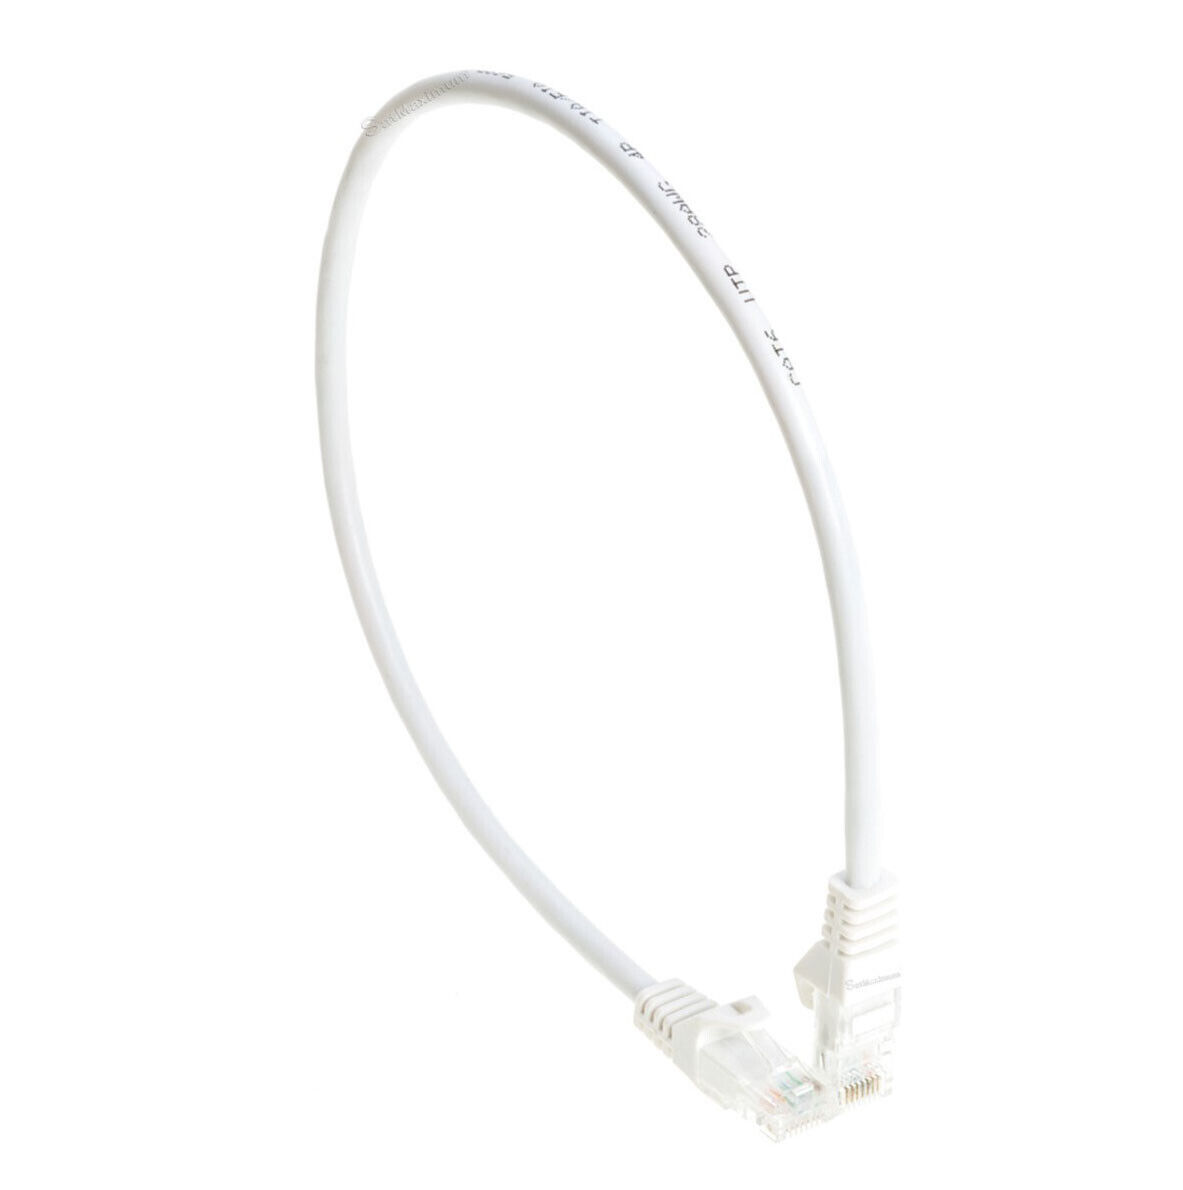 CAT6e/CAT6 Ethernet LAN Network RJ-45 Patch Cable White 1.5FT-20FT Multipack LOT